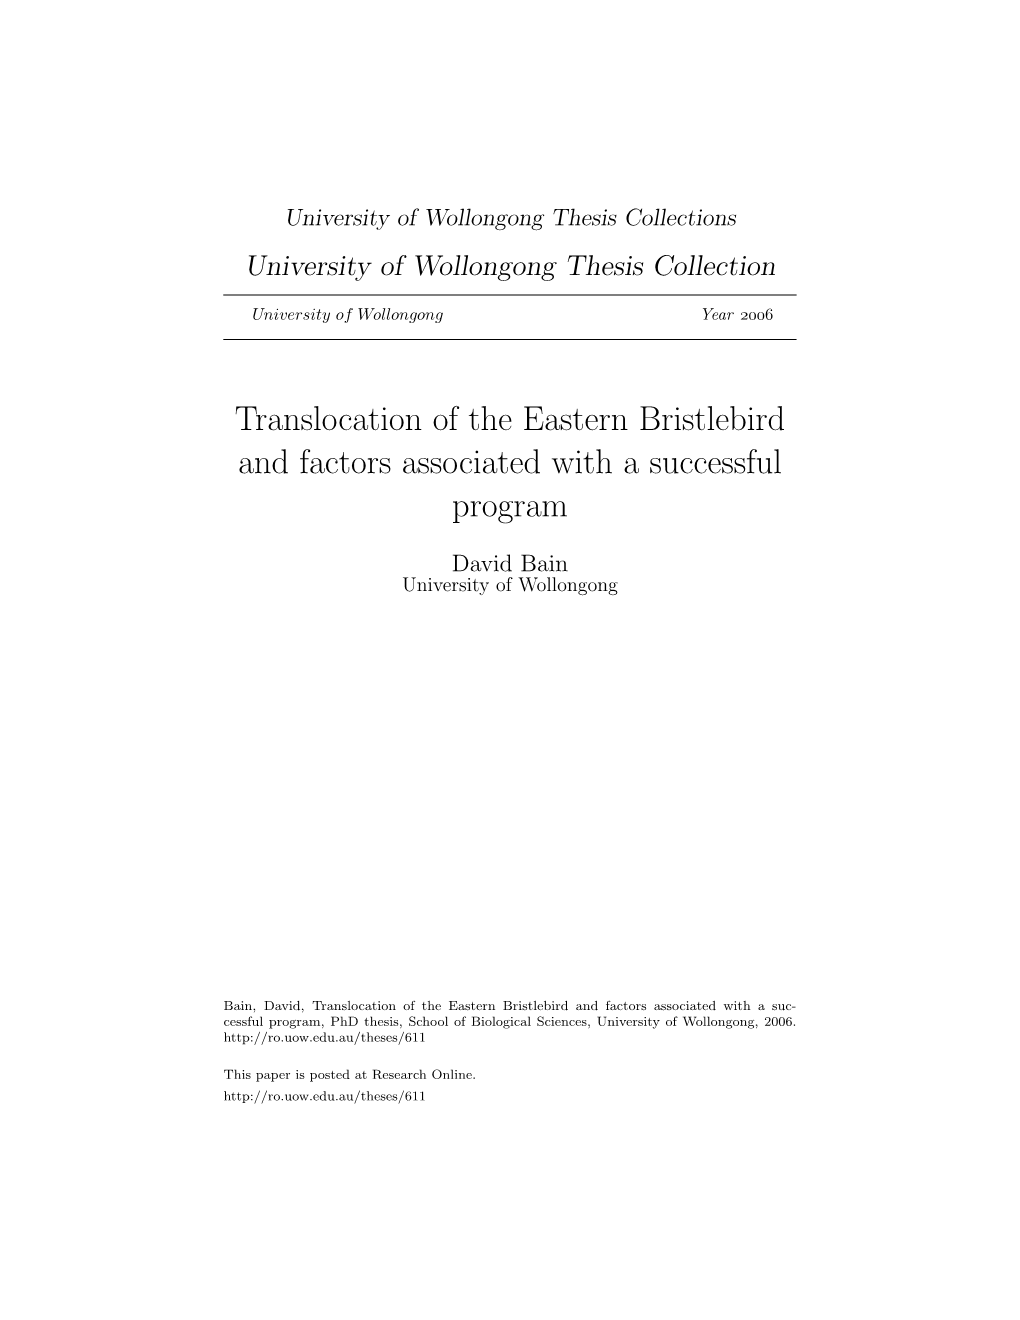 Translocation of the Eastern Bristlebird and Factors Associated with a Successful Program